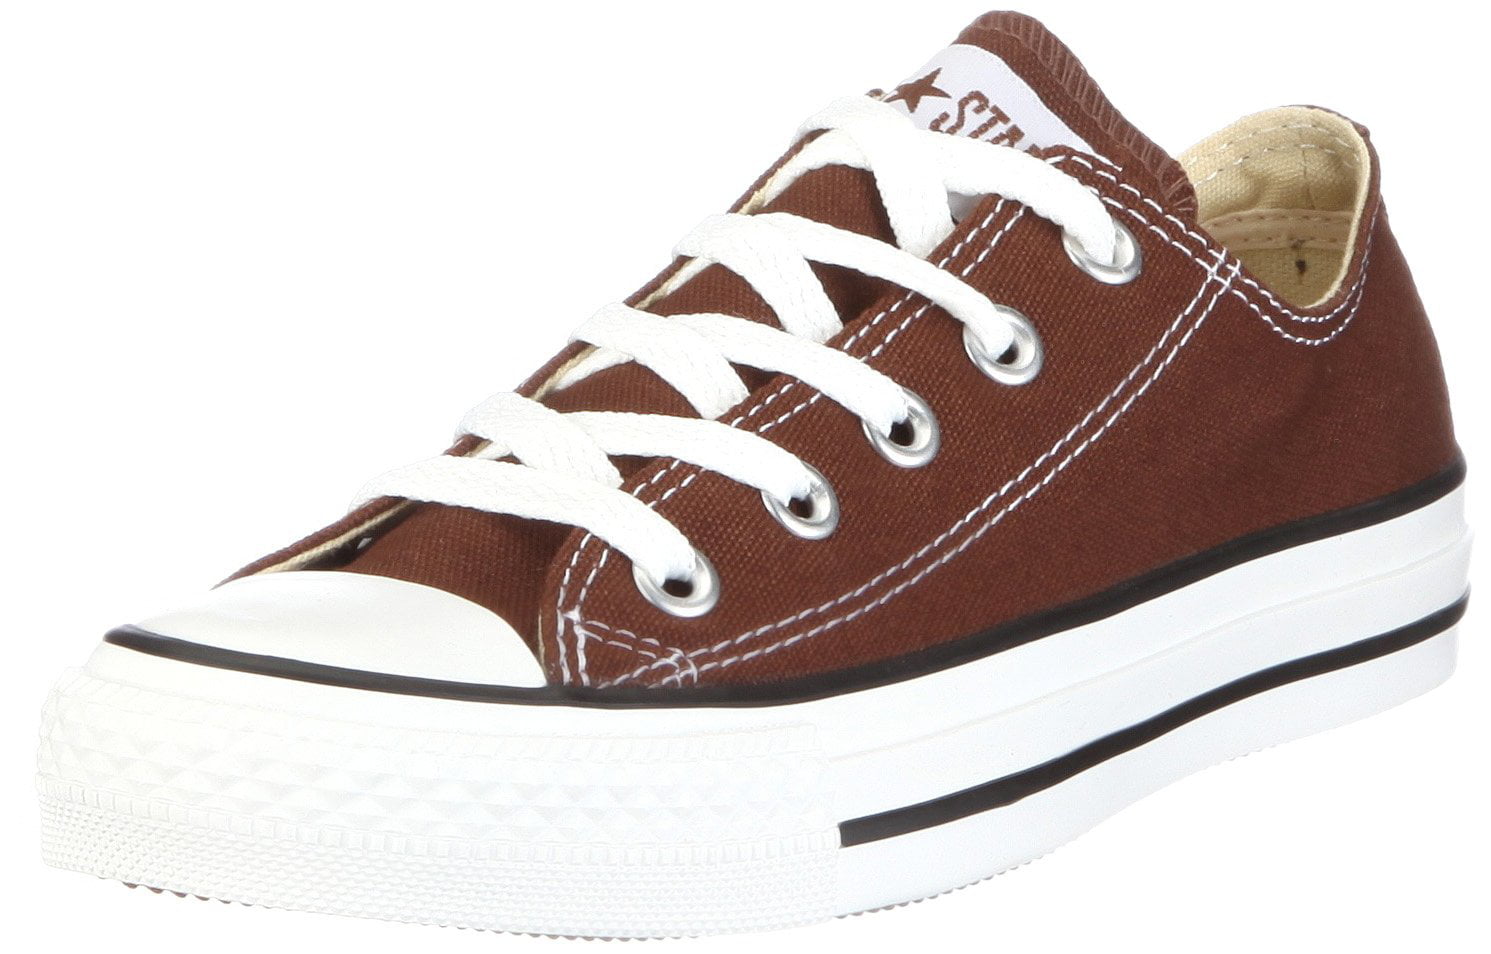 Converse Chuck Taylor All Star Low Sneakers Brown 